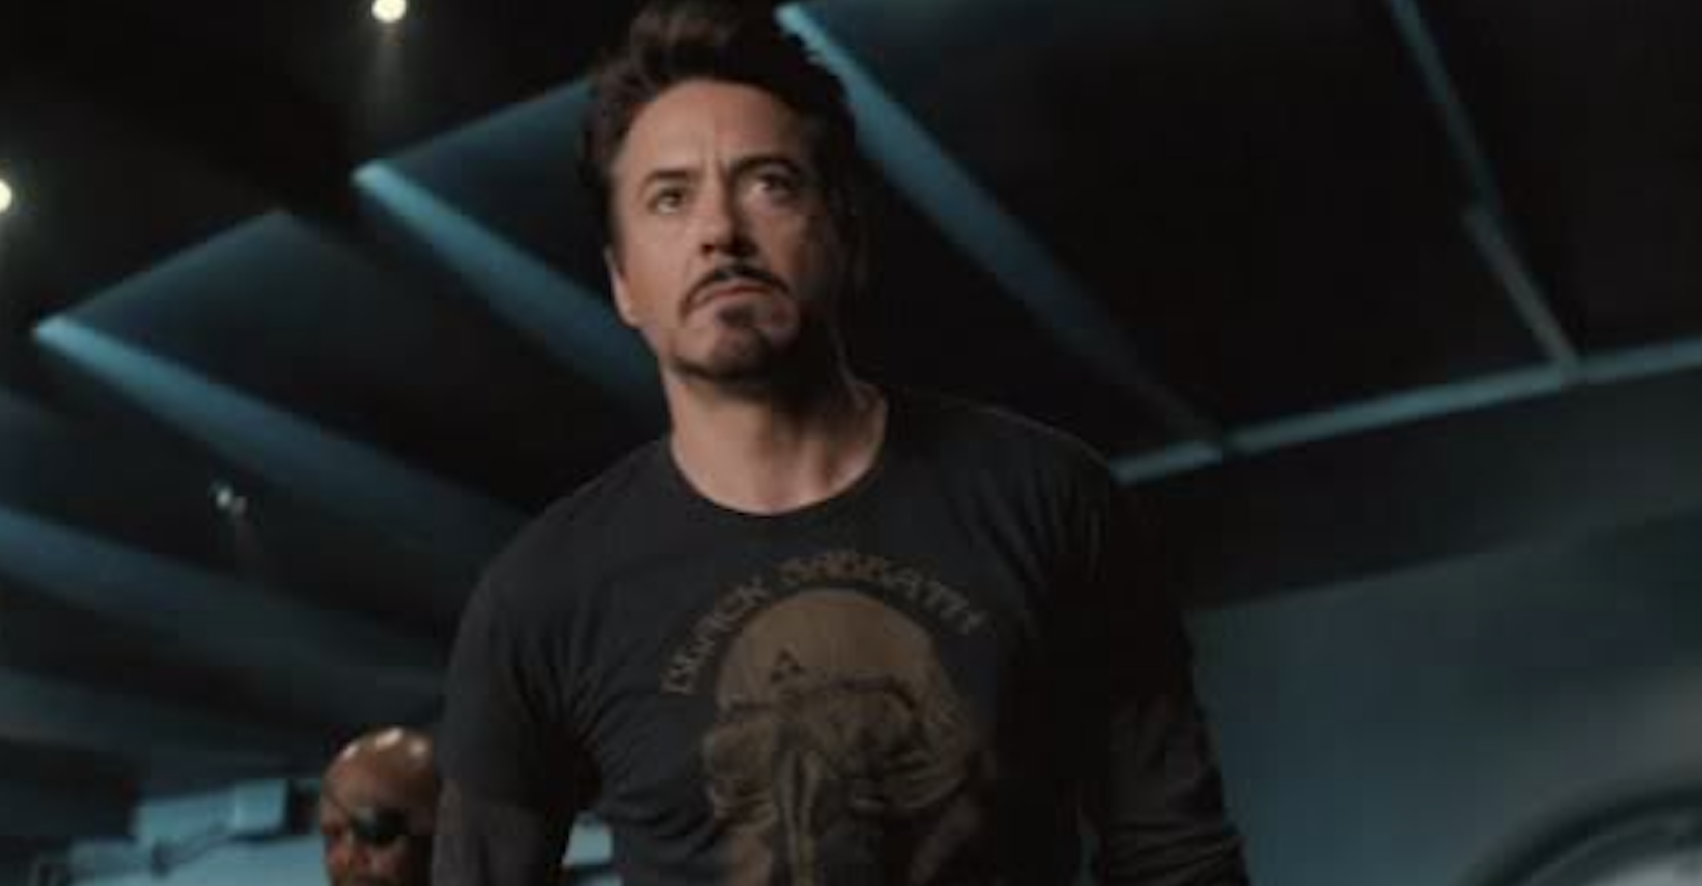 Tony Stark would make for cool closet cosplays